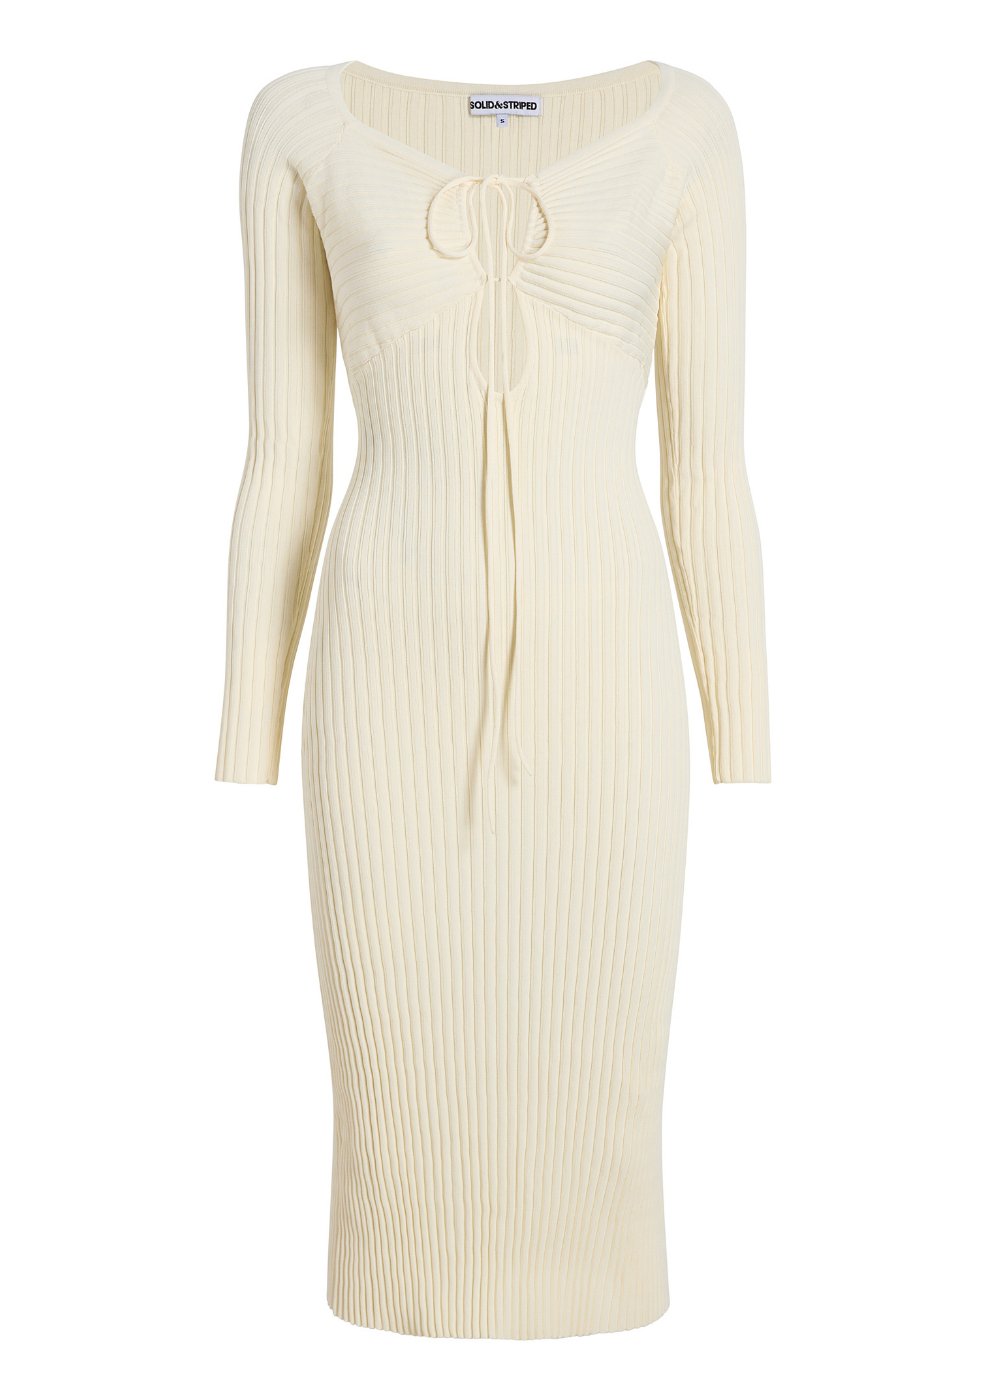 The Lisa Long Sleeve Dress - Solid & Striped